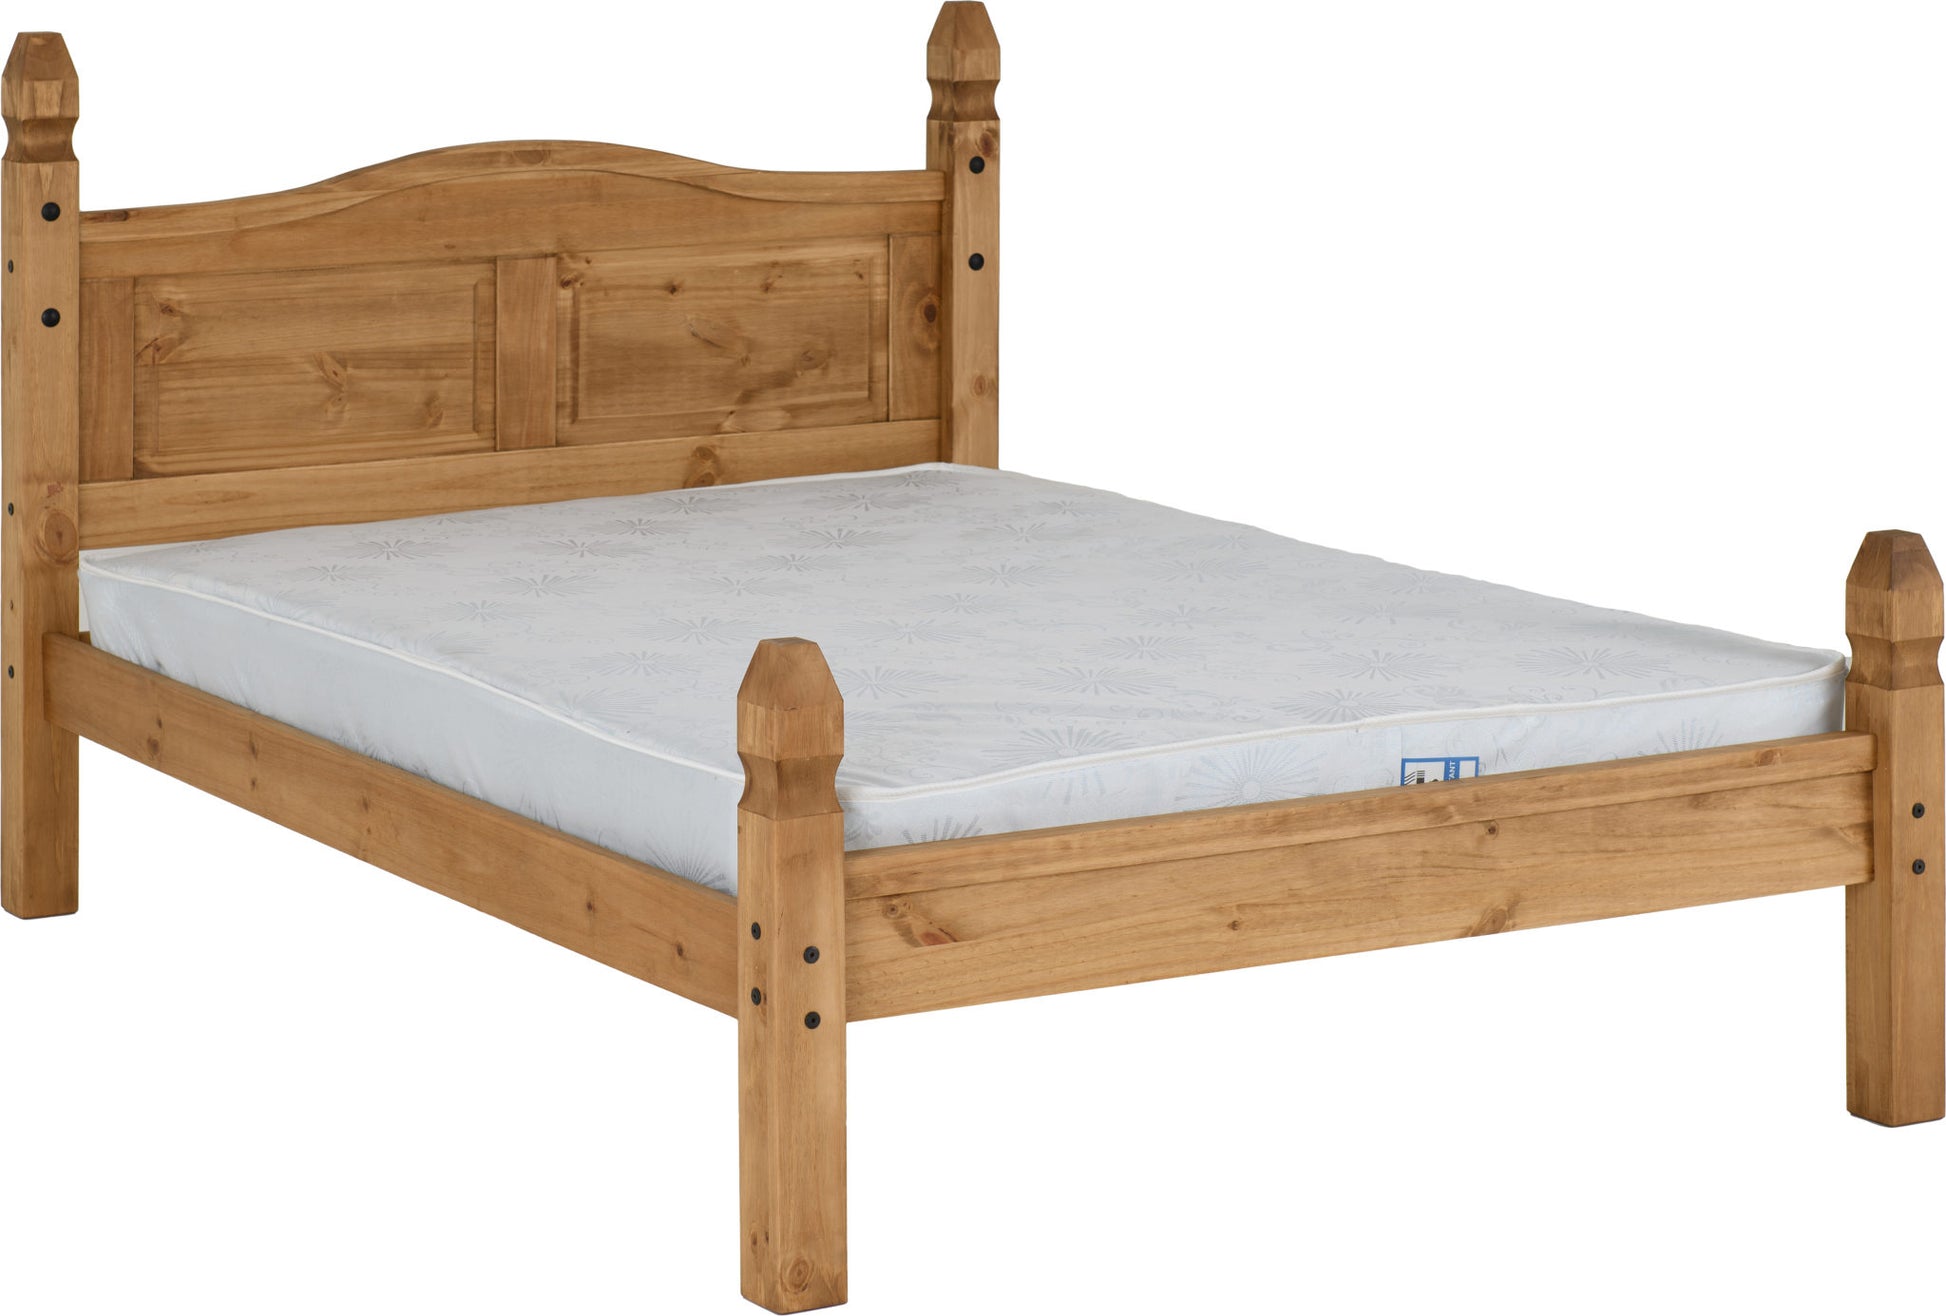 Corona 4'6" Bed Low Foot End - Distressed Waxed Pine